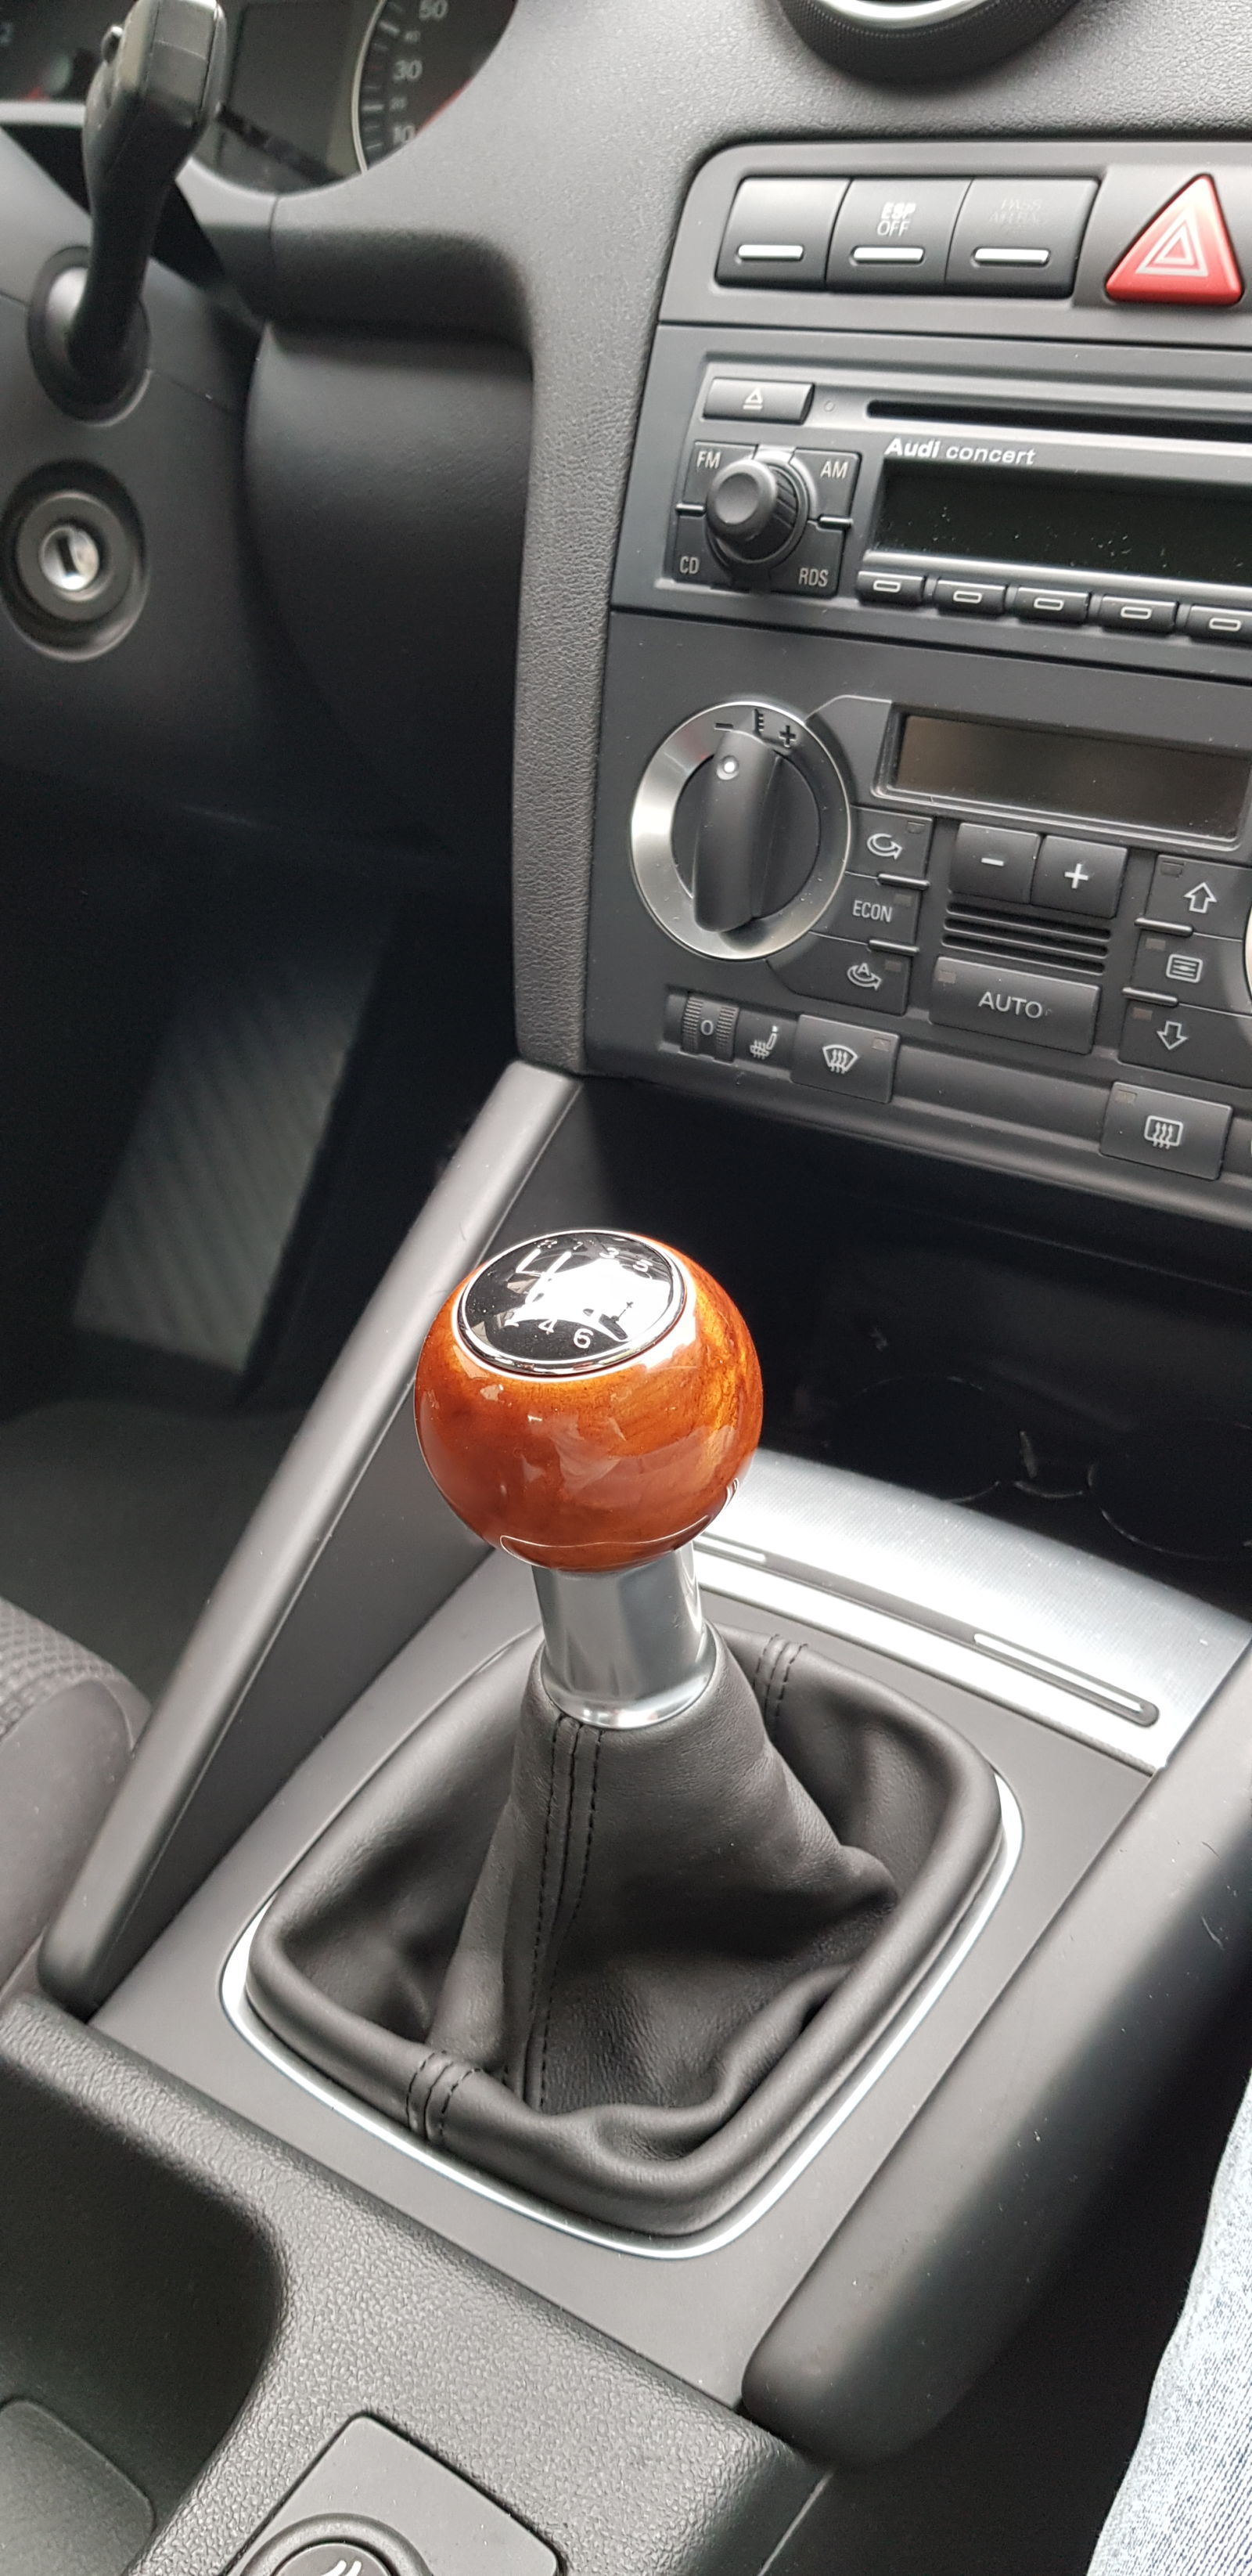 Illustration for article titled Slob on my new shift knob